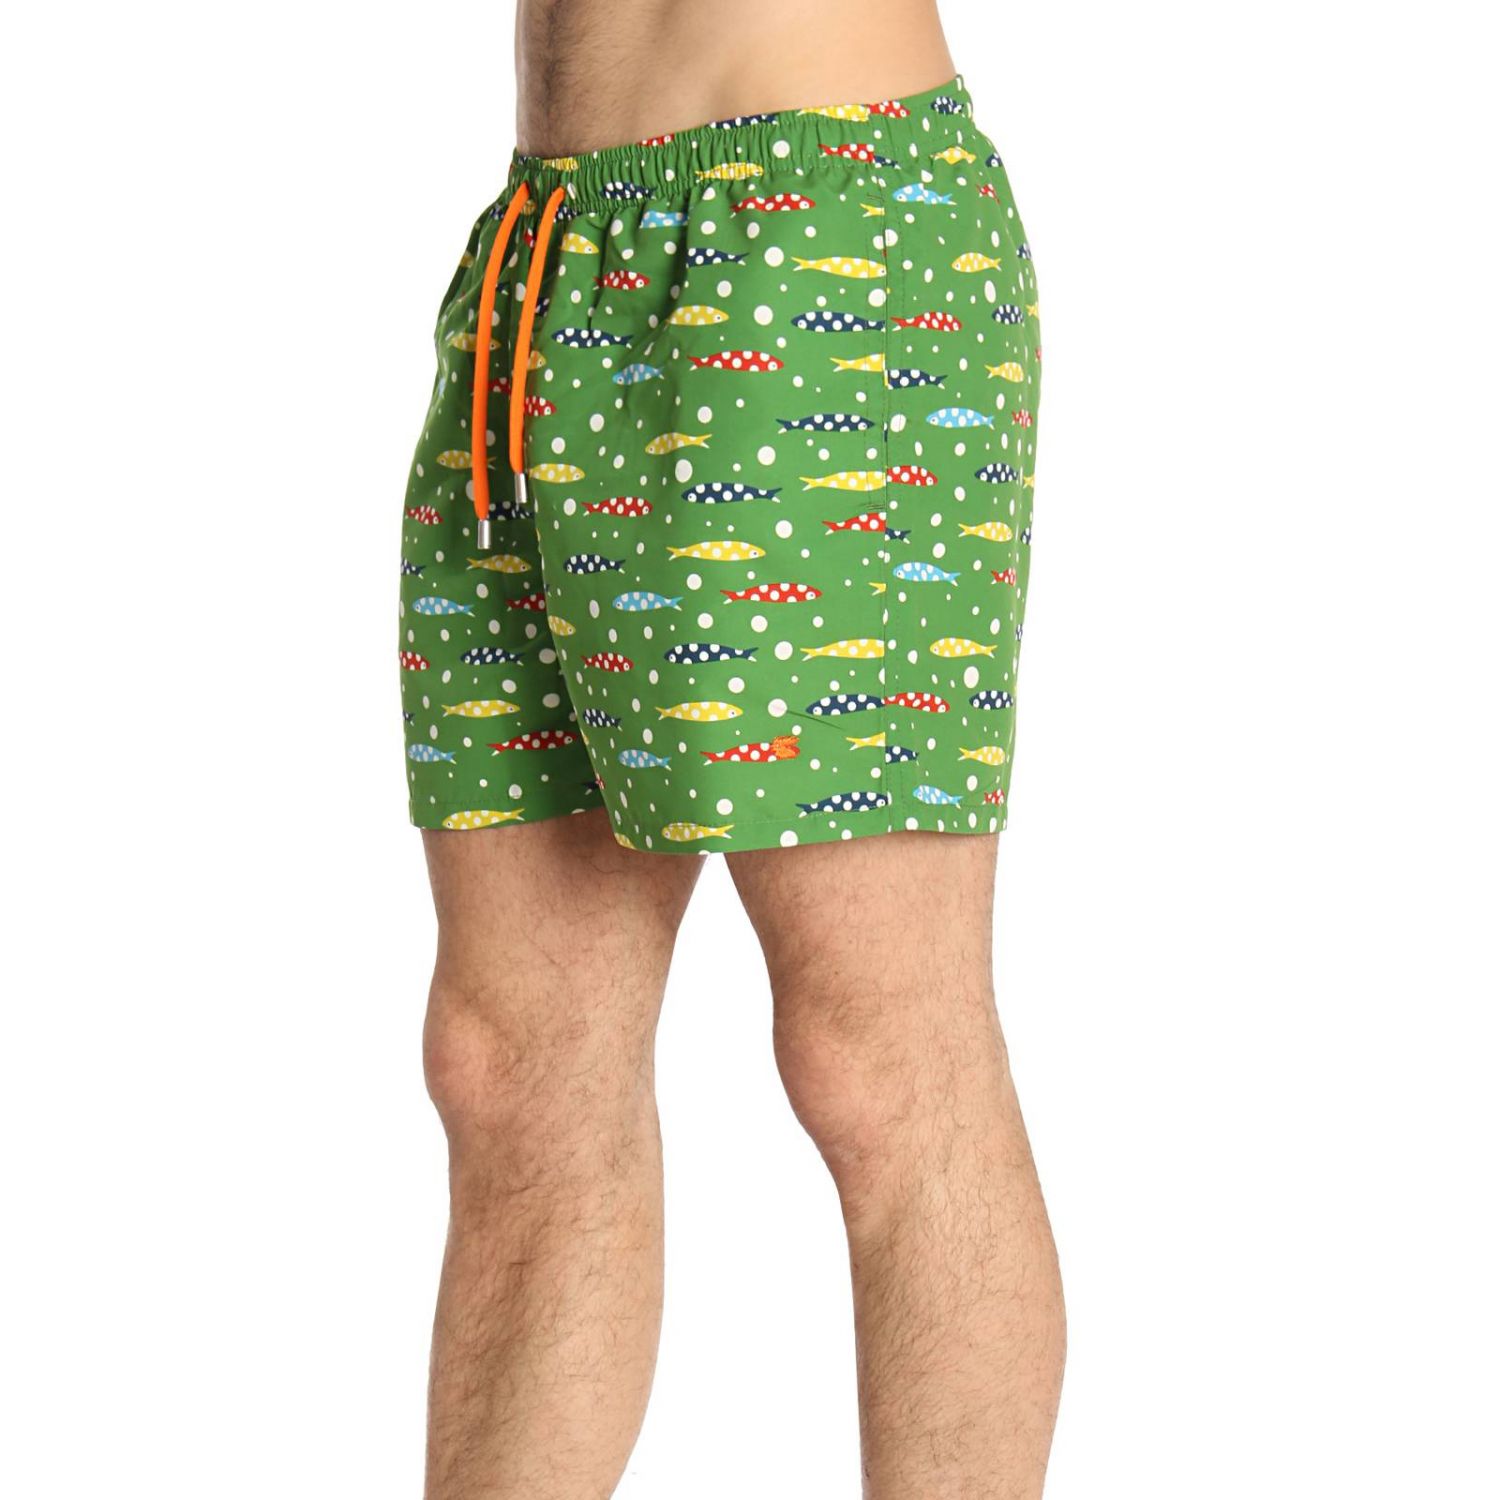 Gallo Outlet: Swimsuit men - Green | Swimsuit Gallo AP505281 GIGLIO.COM